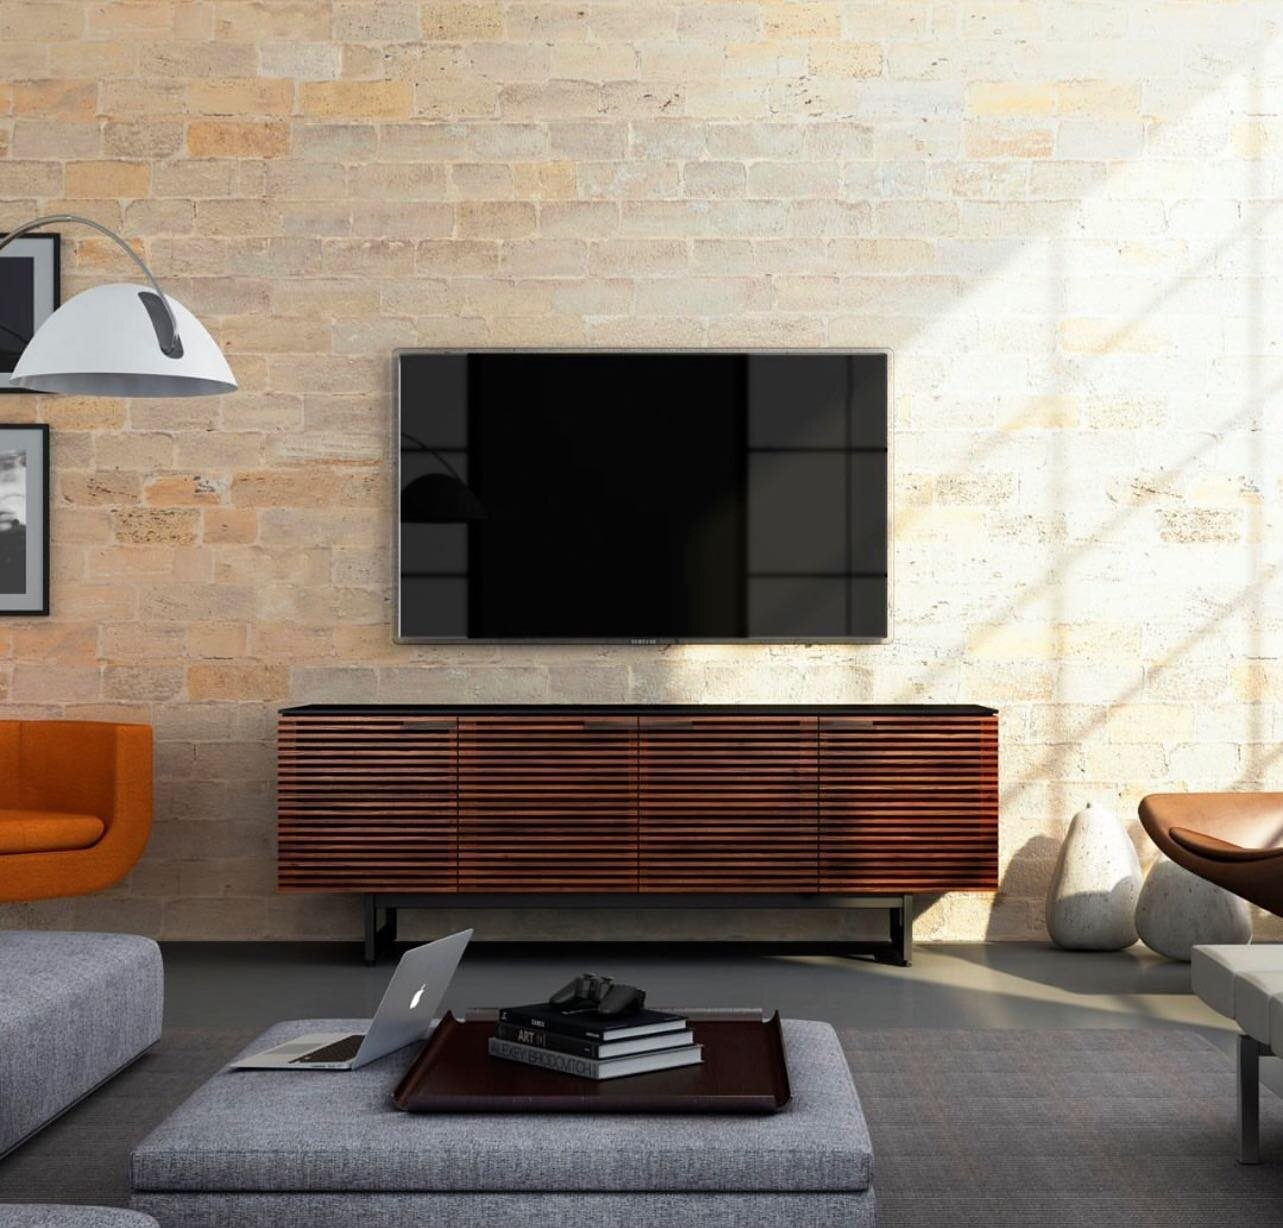 Enhance your everyday life with @bdi_furniture + make your everyday life a little bit more stylish. 

#denver #colorado #decor #decorinspo #decorinspiration #furnituredesign #furnituredesigner #showroom #design #designshowroom #denverdesign #denverde